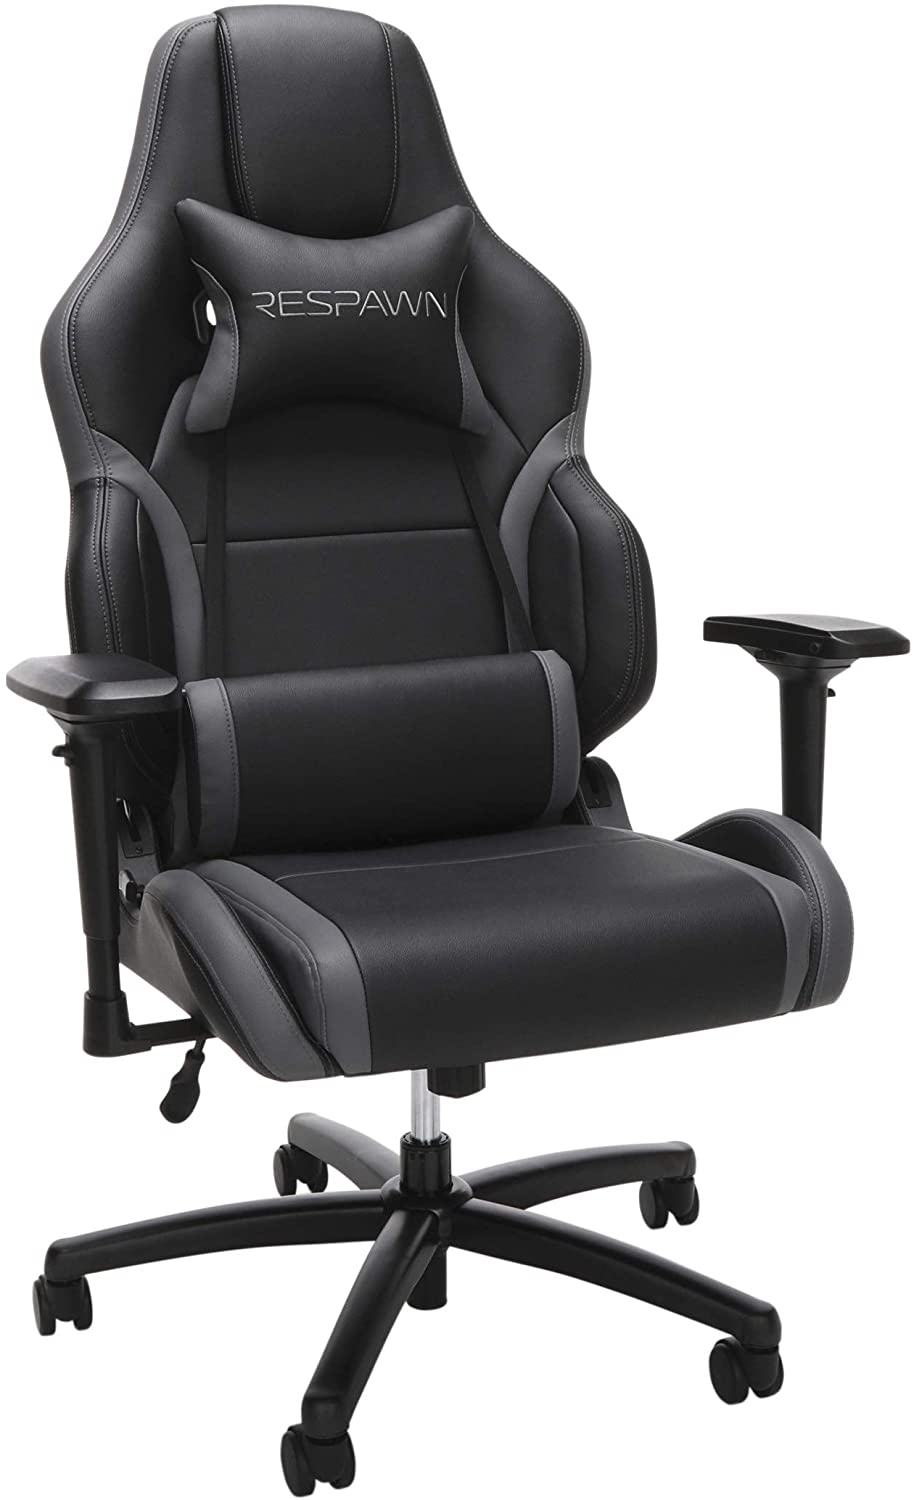 3. RESPAWN RSP-400 ( Big and Tall Racing Style Gaming Chair)